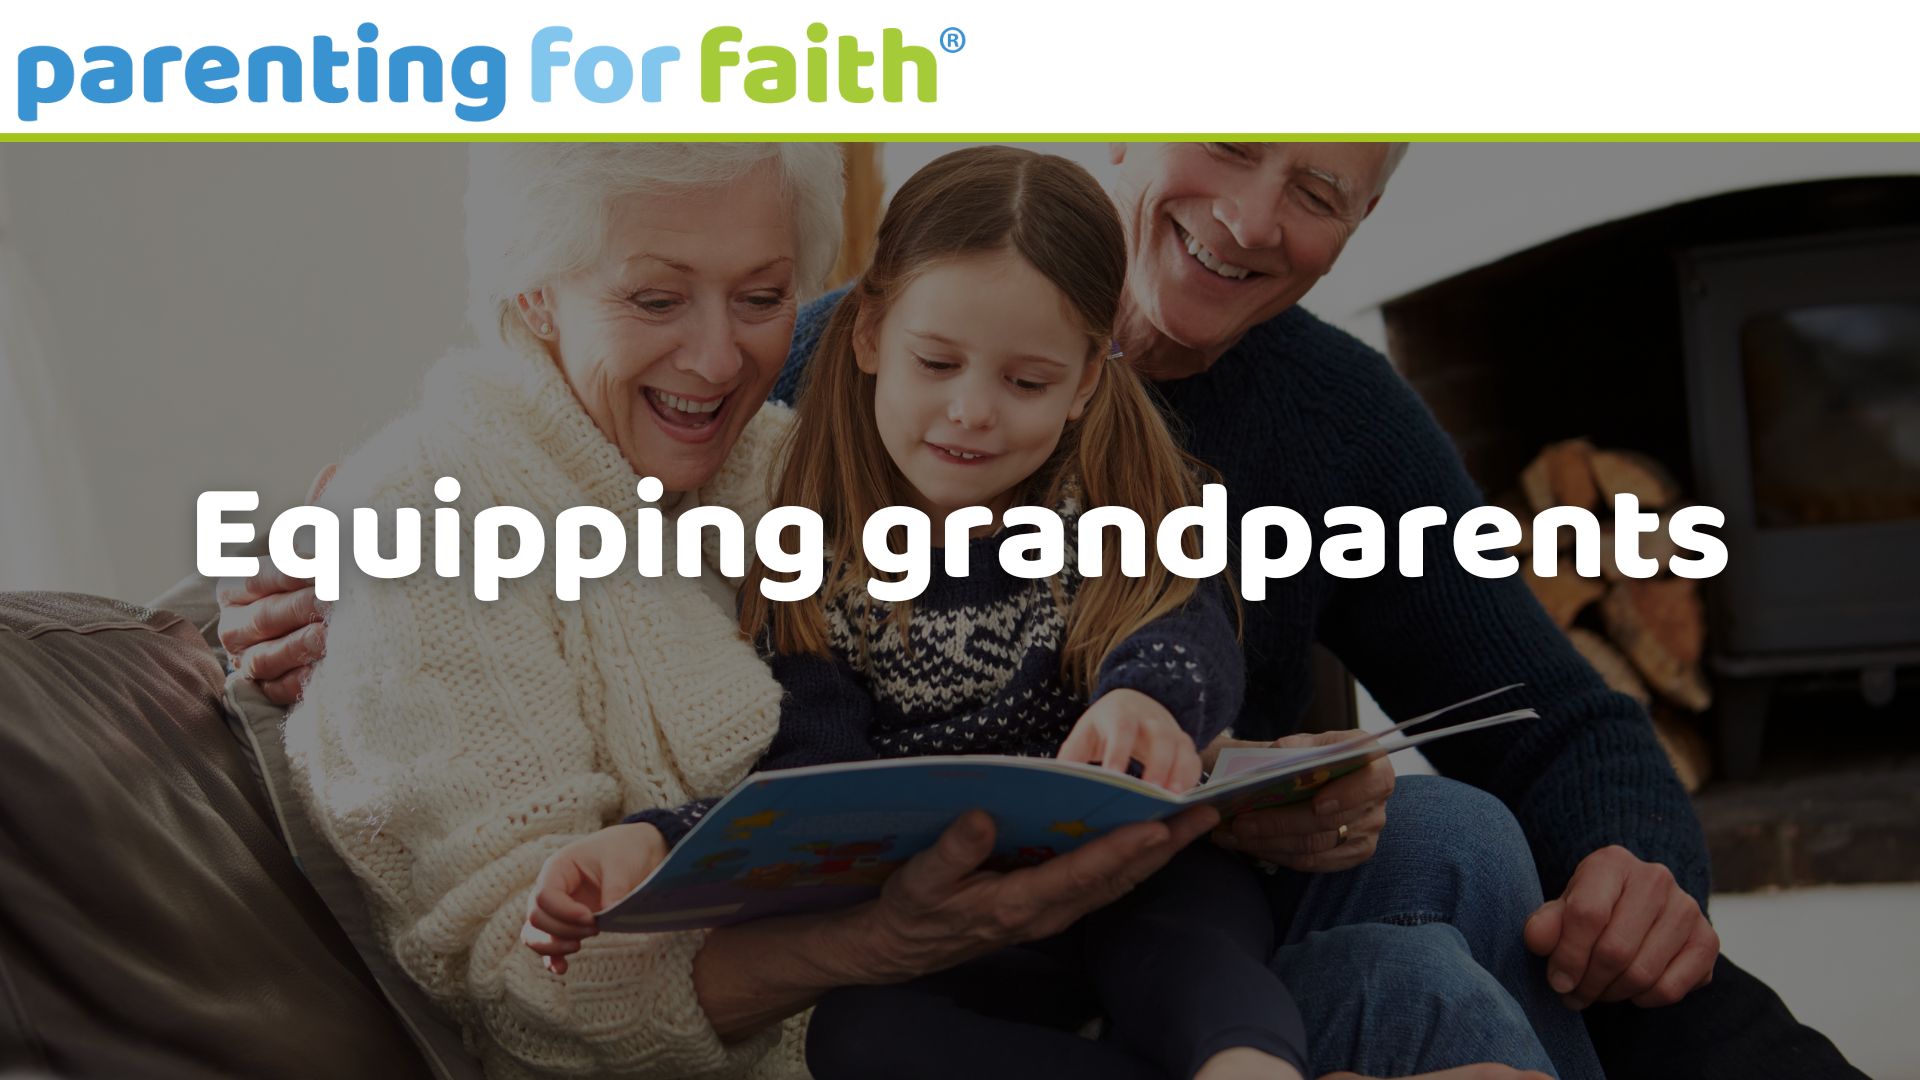 Equipping grandparents image credit Monkey Business Images ()